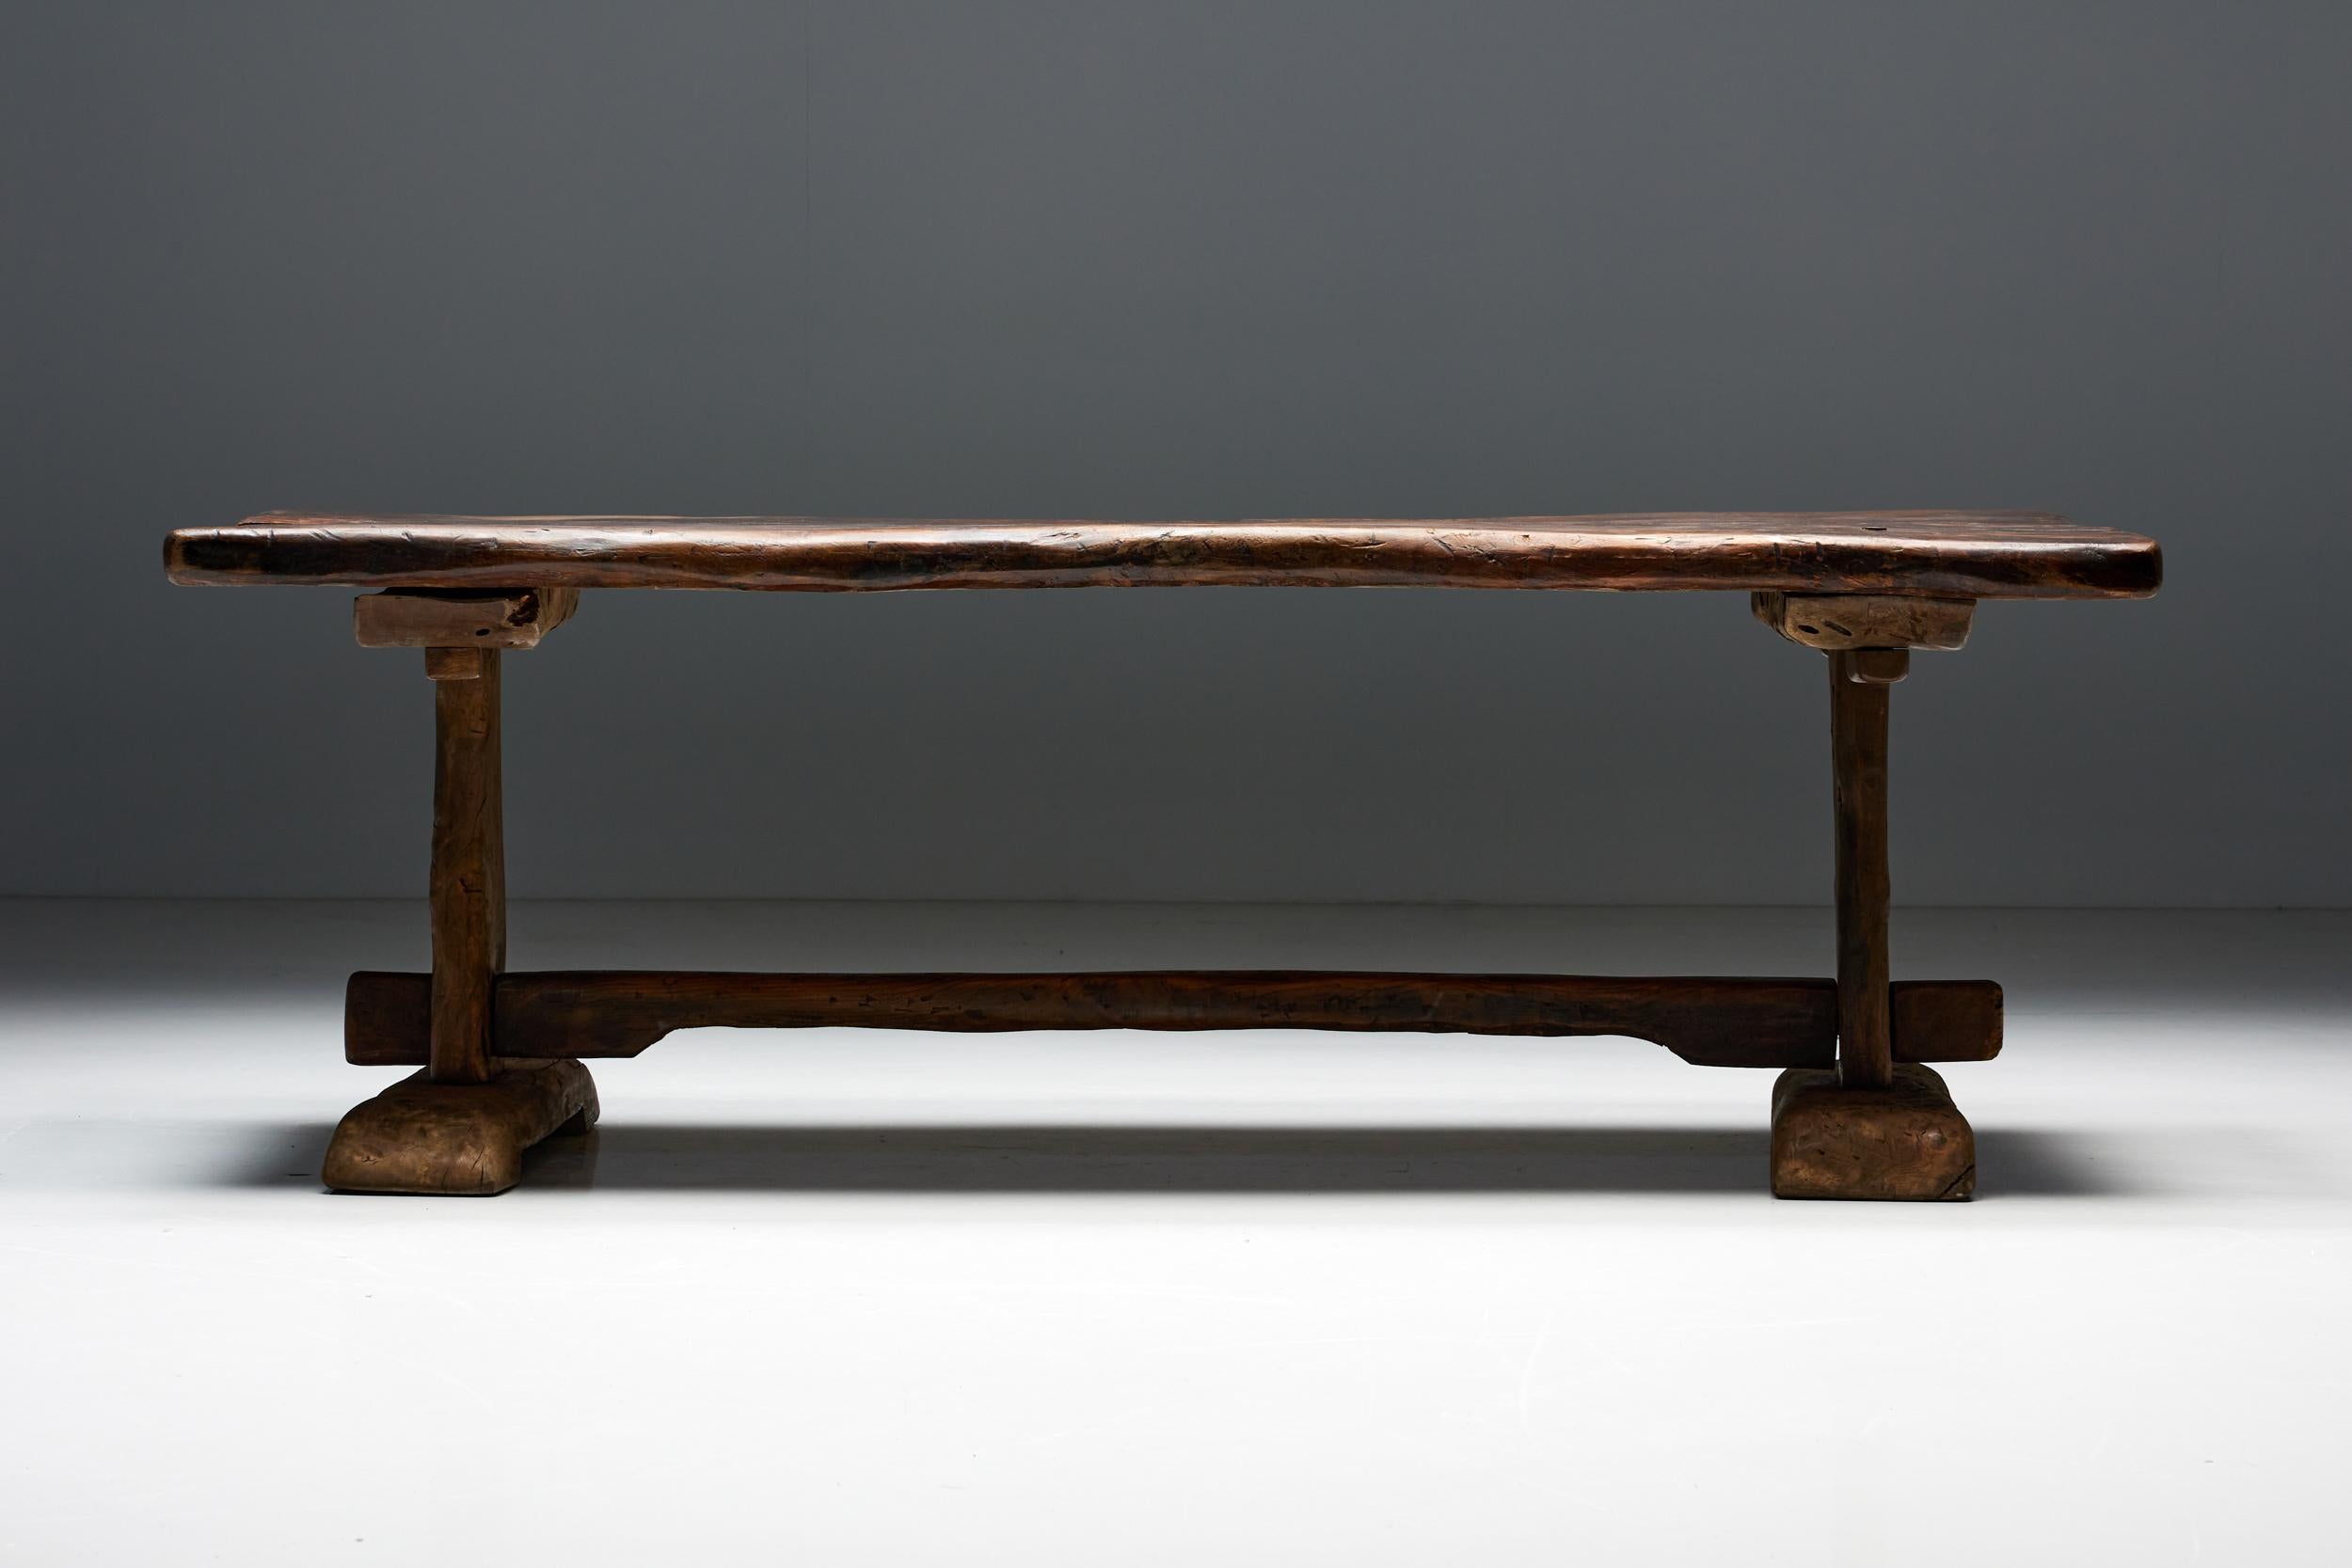 Monoxylite; Rustic; Wabi Sabi; Wooden Bench; Axel Vervoordt; France; Early 20th Century; 

Primitive wooden dining table, handcrafted from the finest dark wood of the early 20th century, the perfect addition to any wabi-sabi style interior. Its